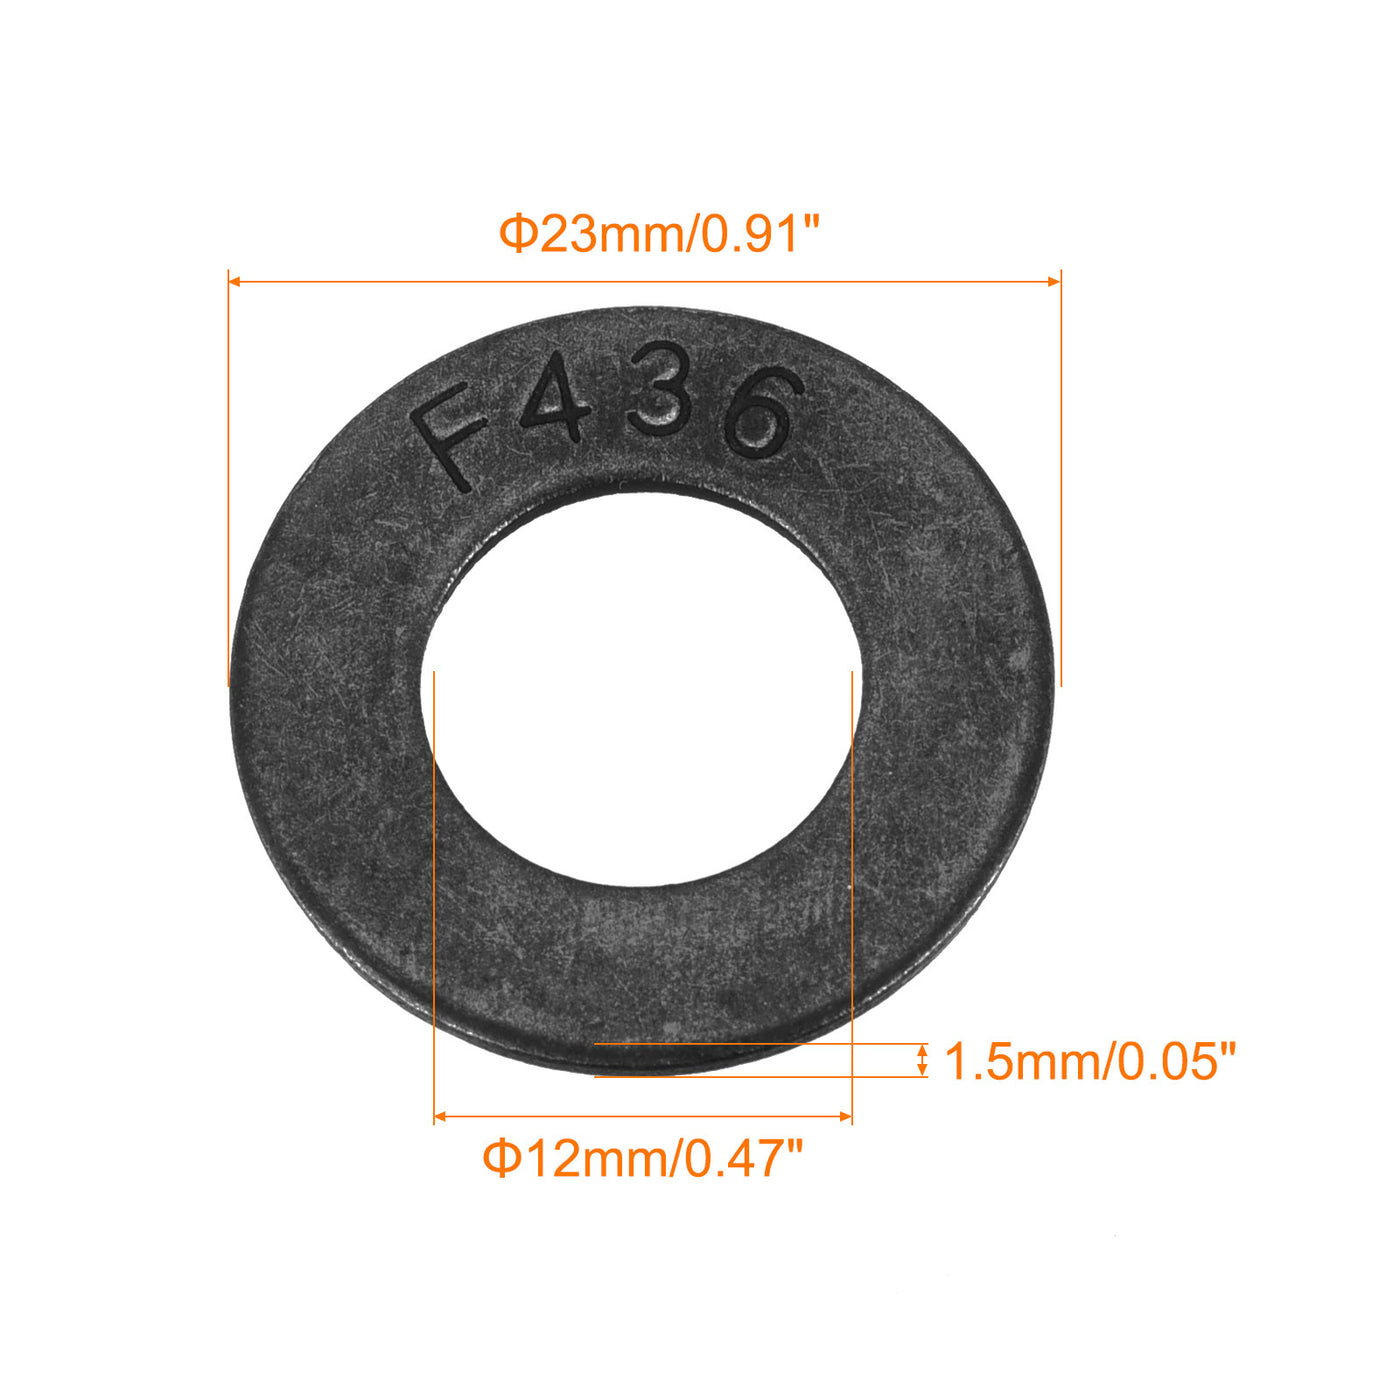 uxcell Uxcell 7/16-Inch Flat Washer, Alloy Steel Black Oxide Finish Pack of 50